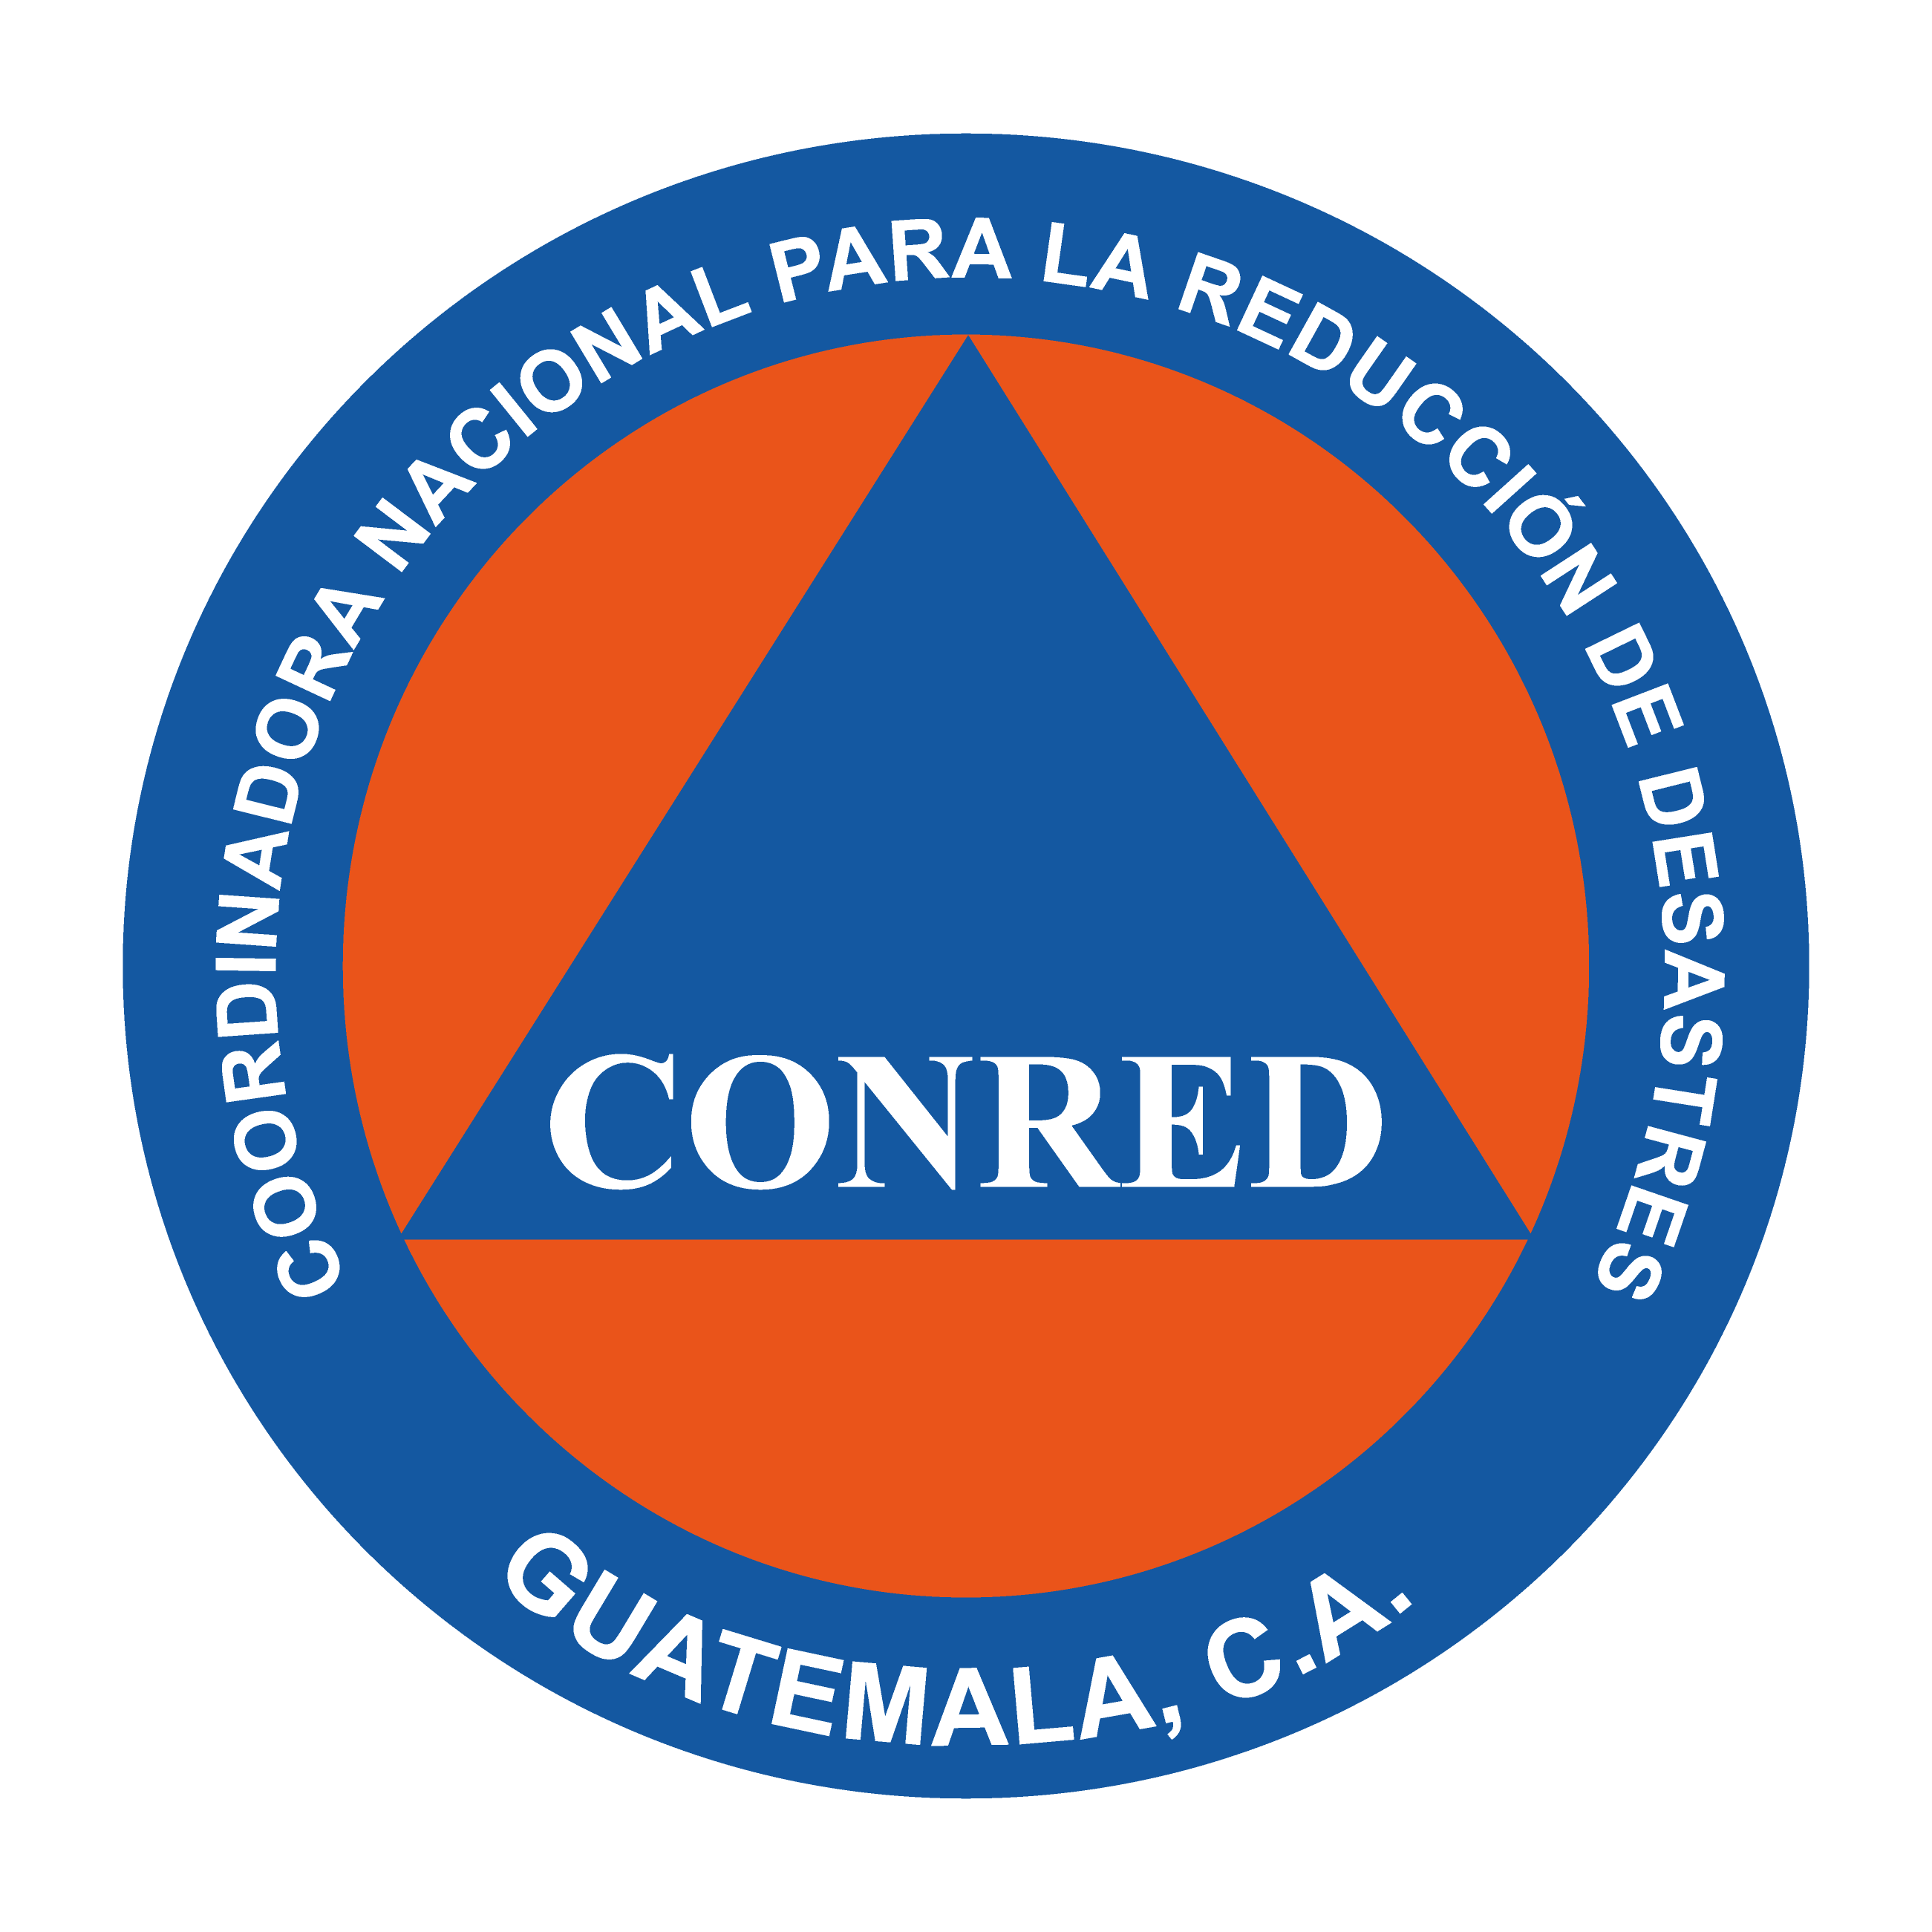 CONRED Guatemala - National Coordinator for Disaster Reduction